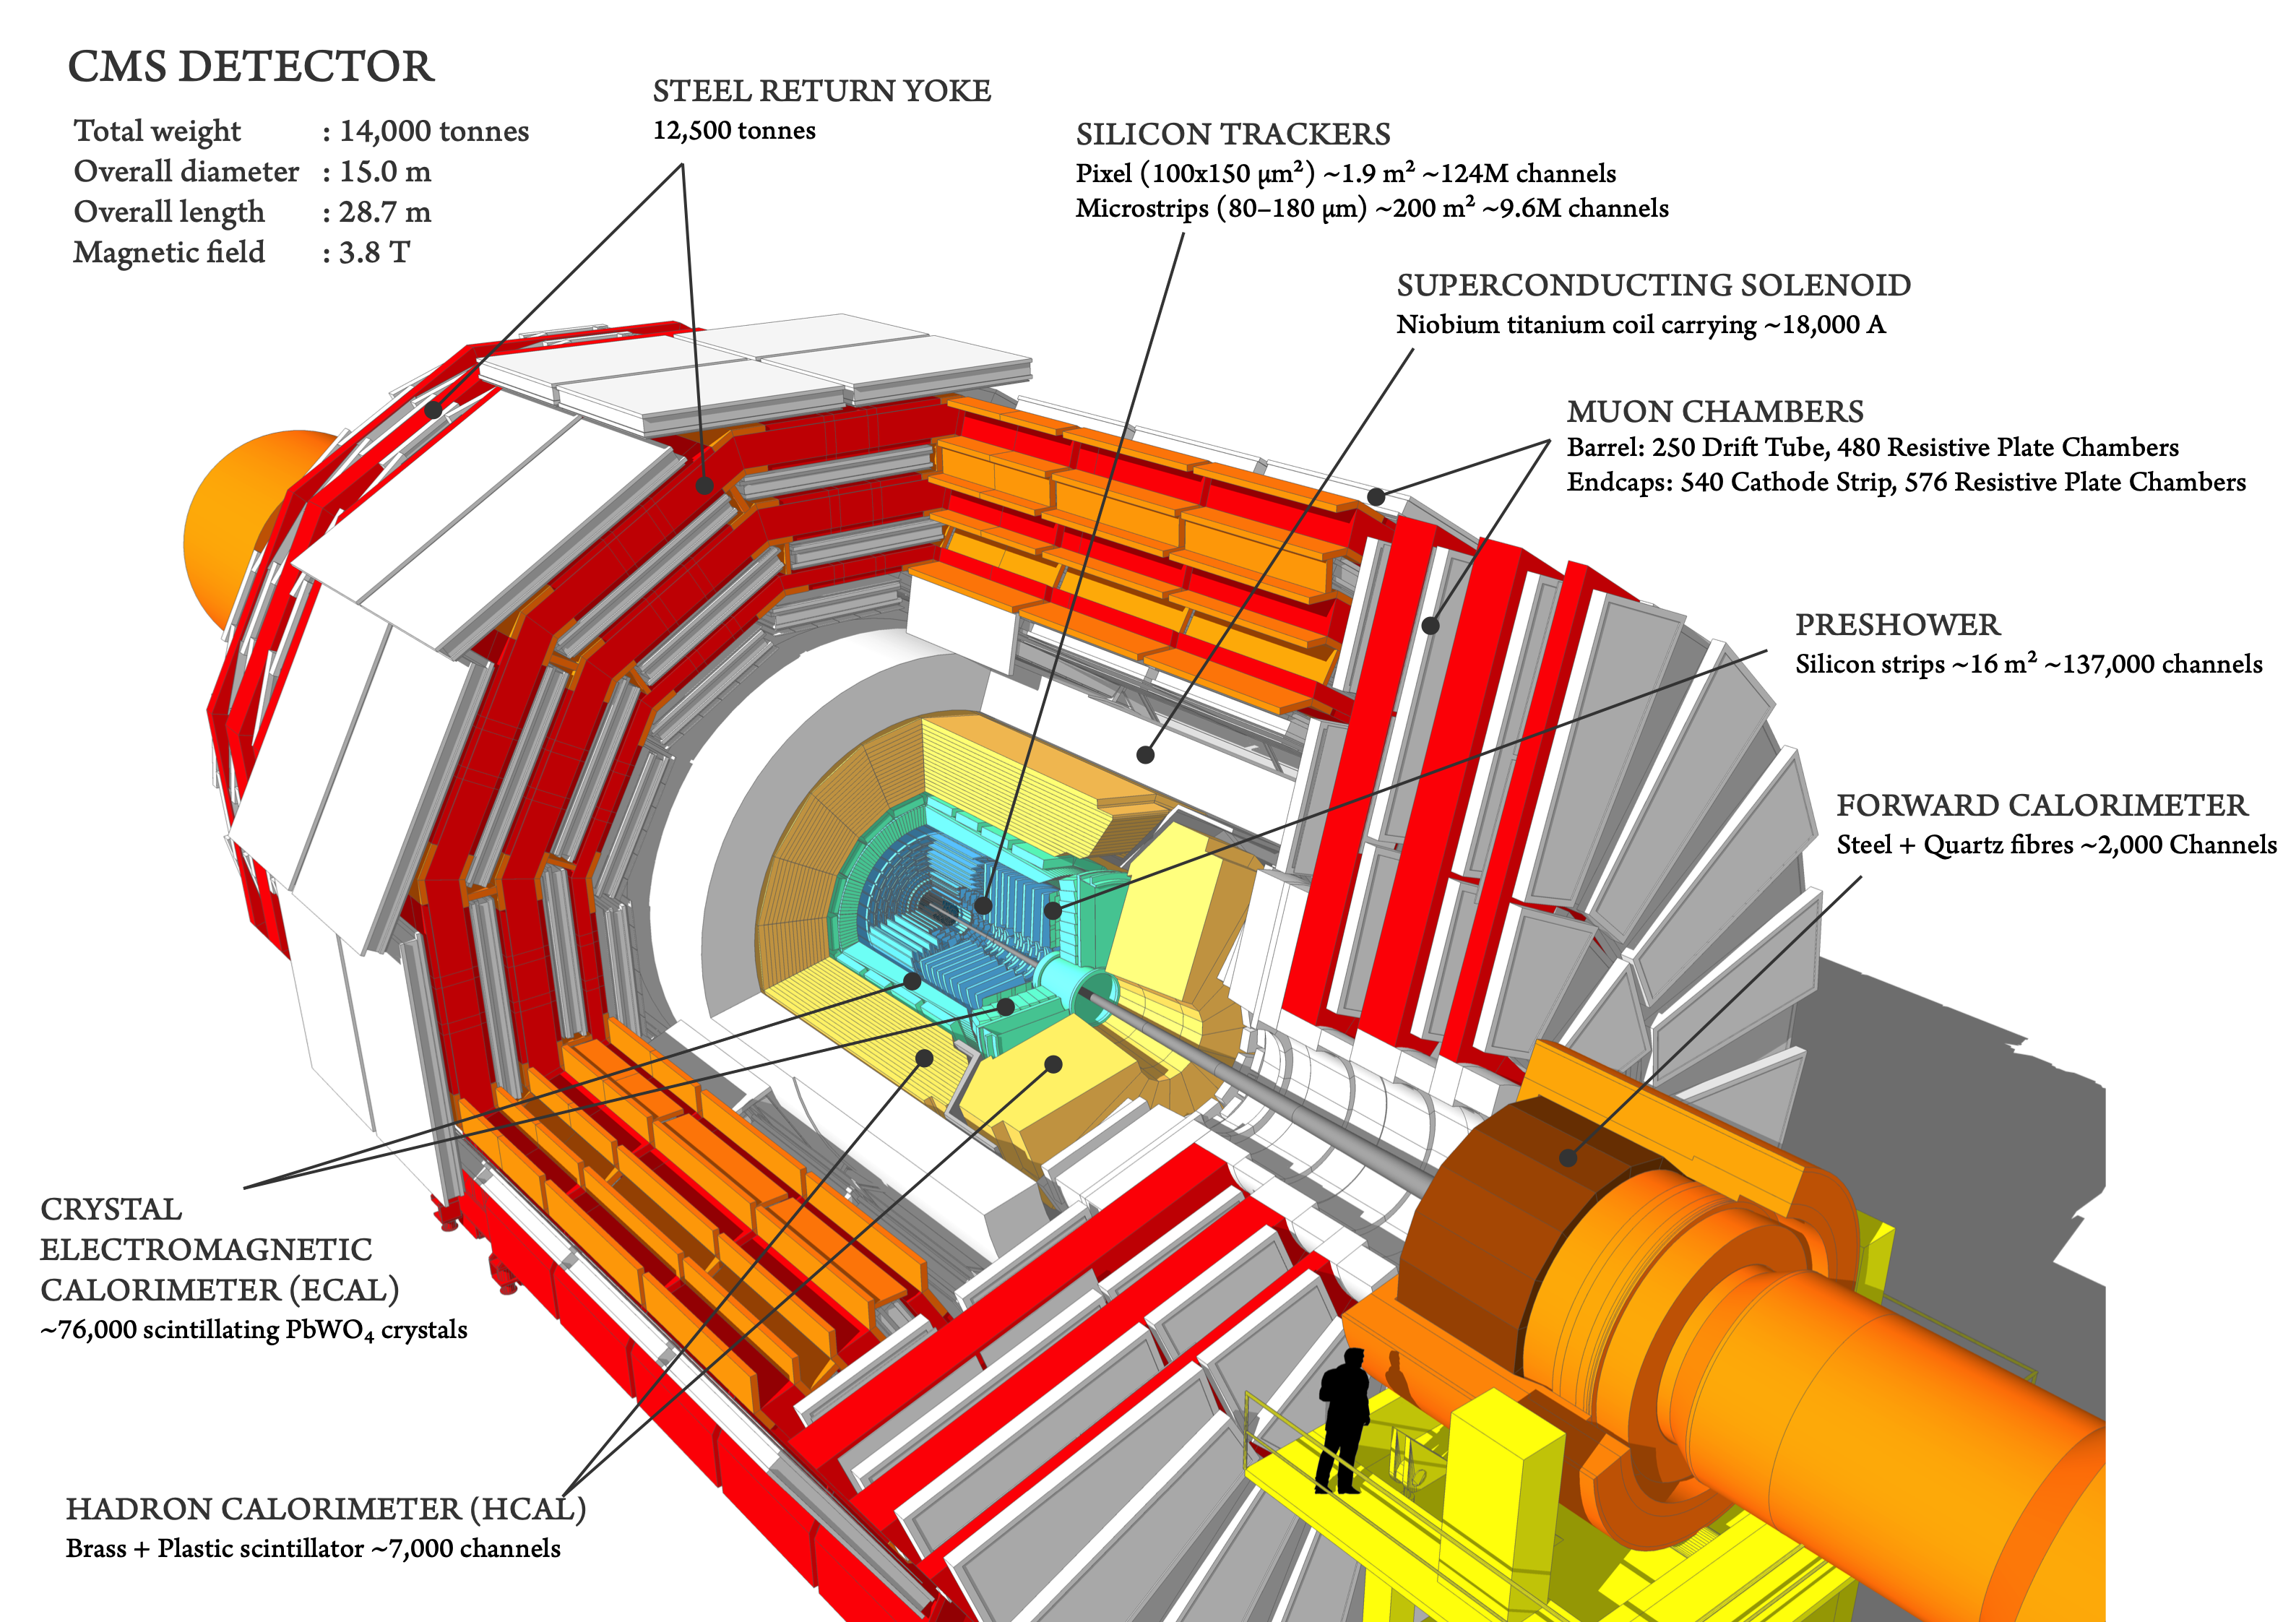 Cutout view of the CMS detector. Note the nested design with a distinct cylindrical 